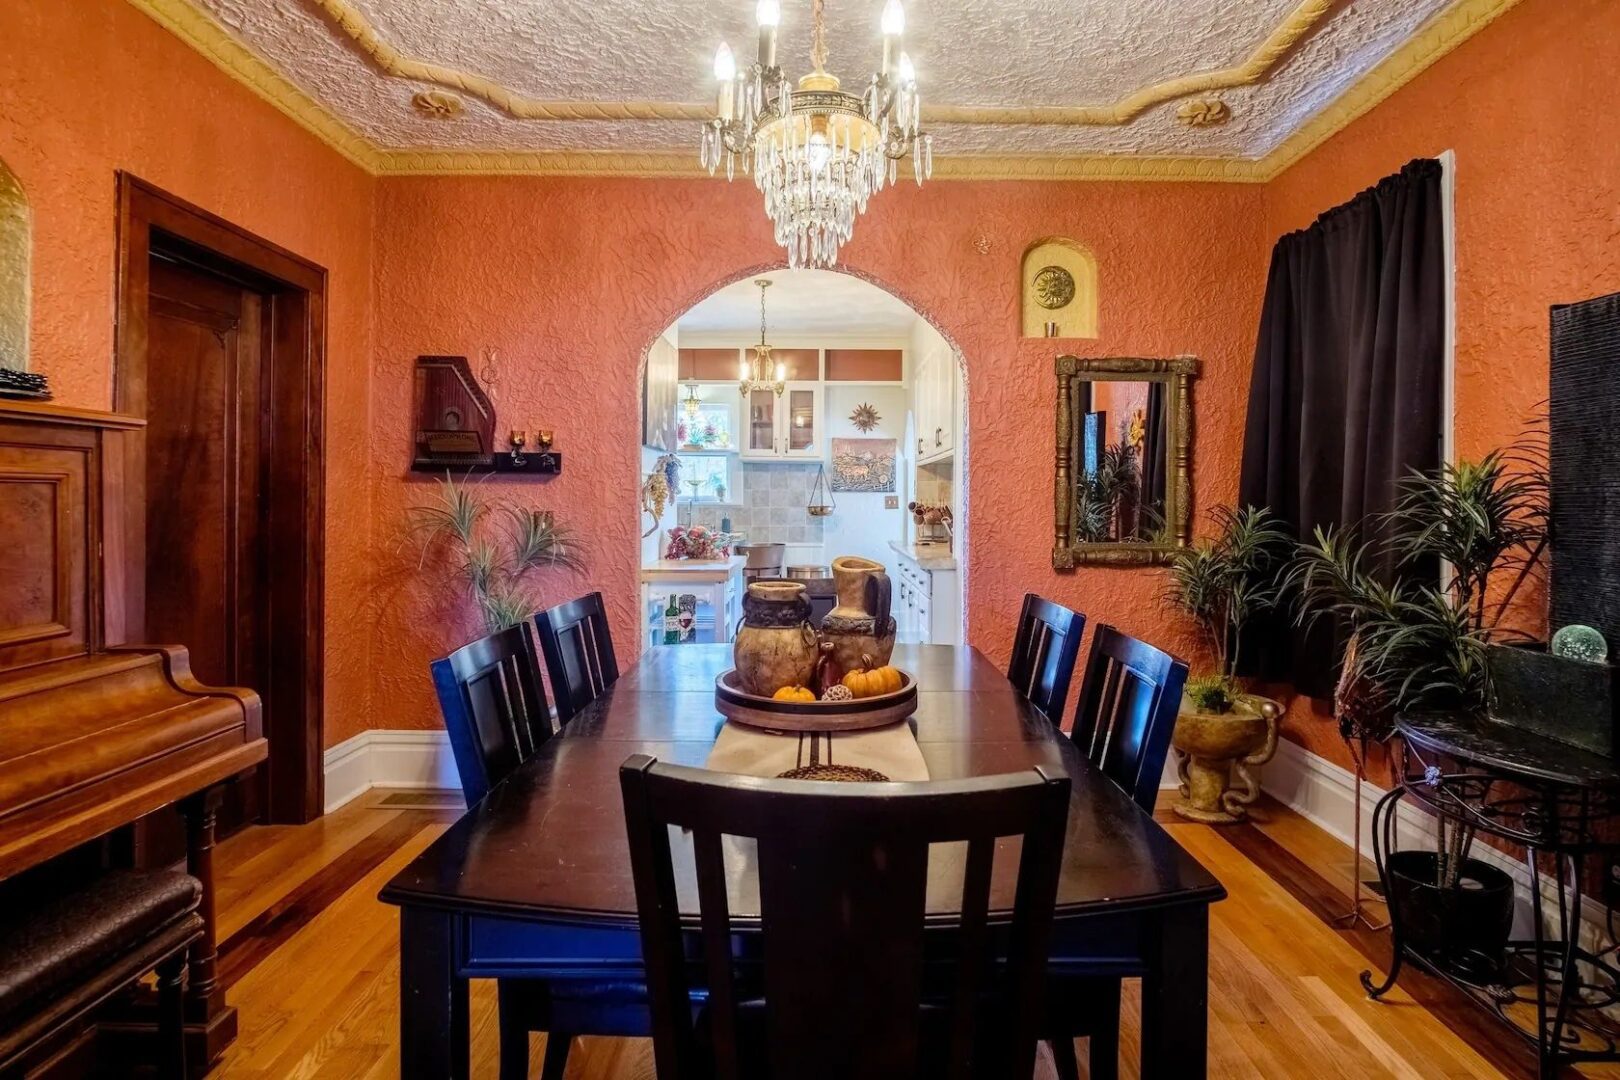 A dining room table with chairs around it